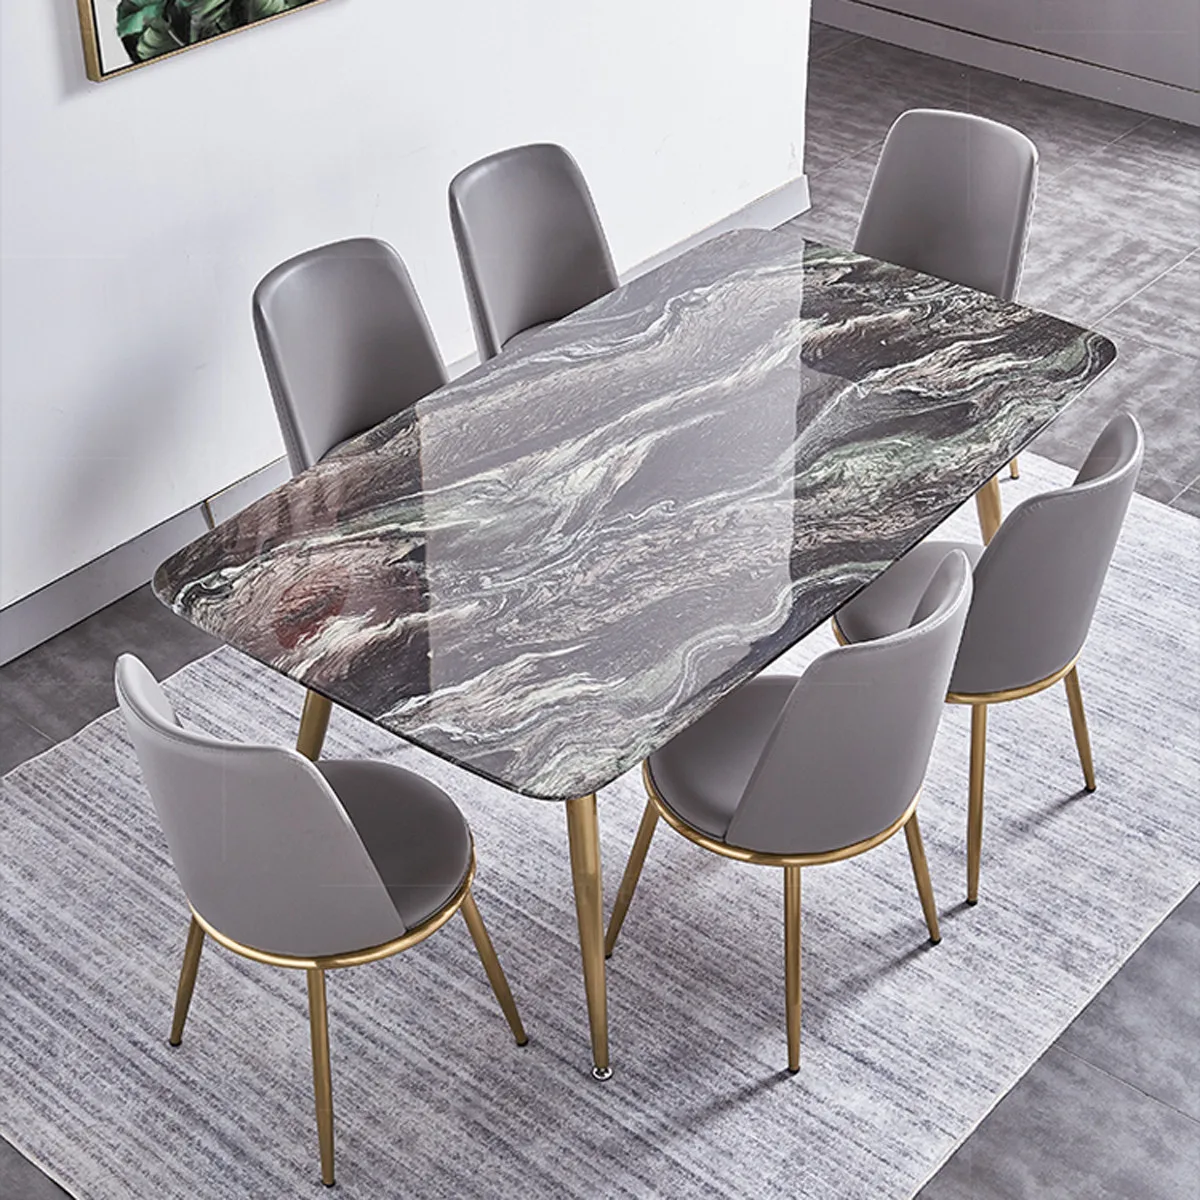 Decoration top nordic gold rectangular dining table 6 seater chairs modern luxury dining room furniture set marble dining tables